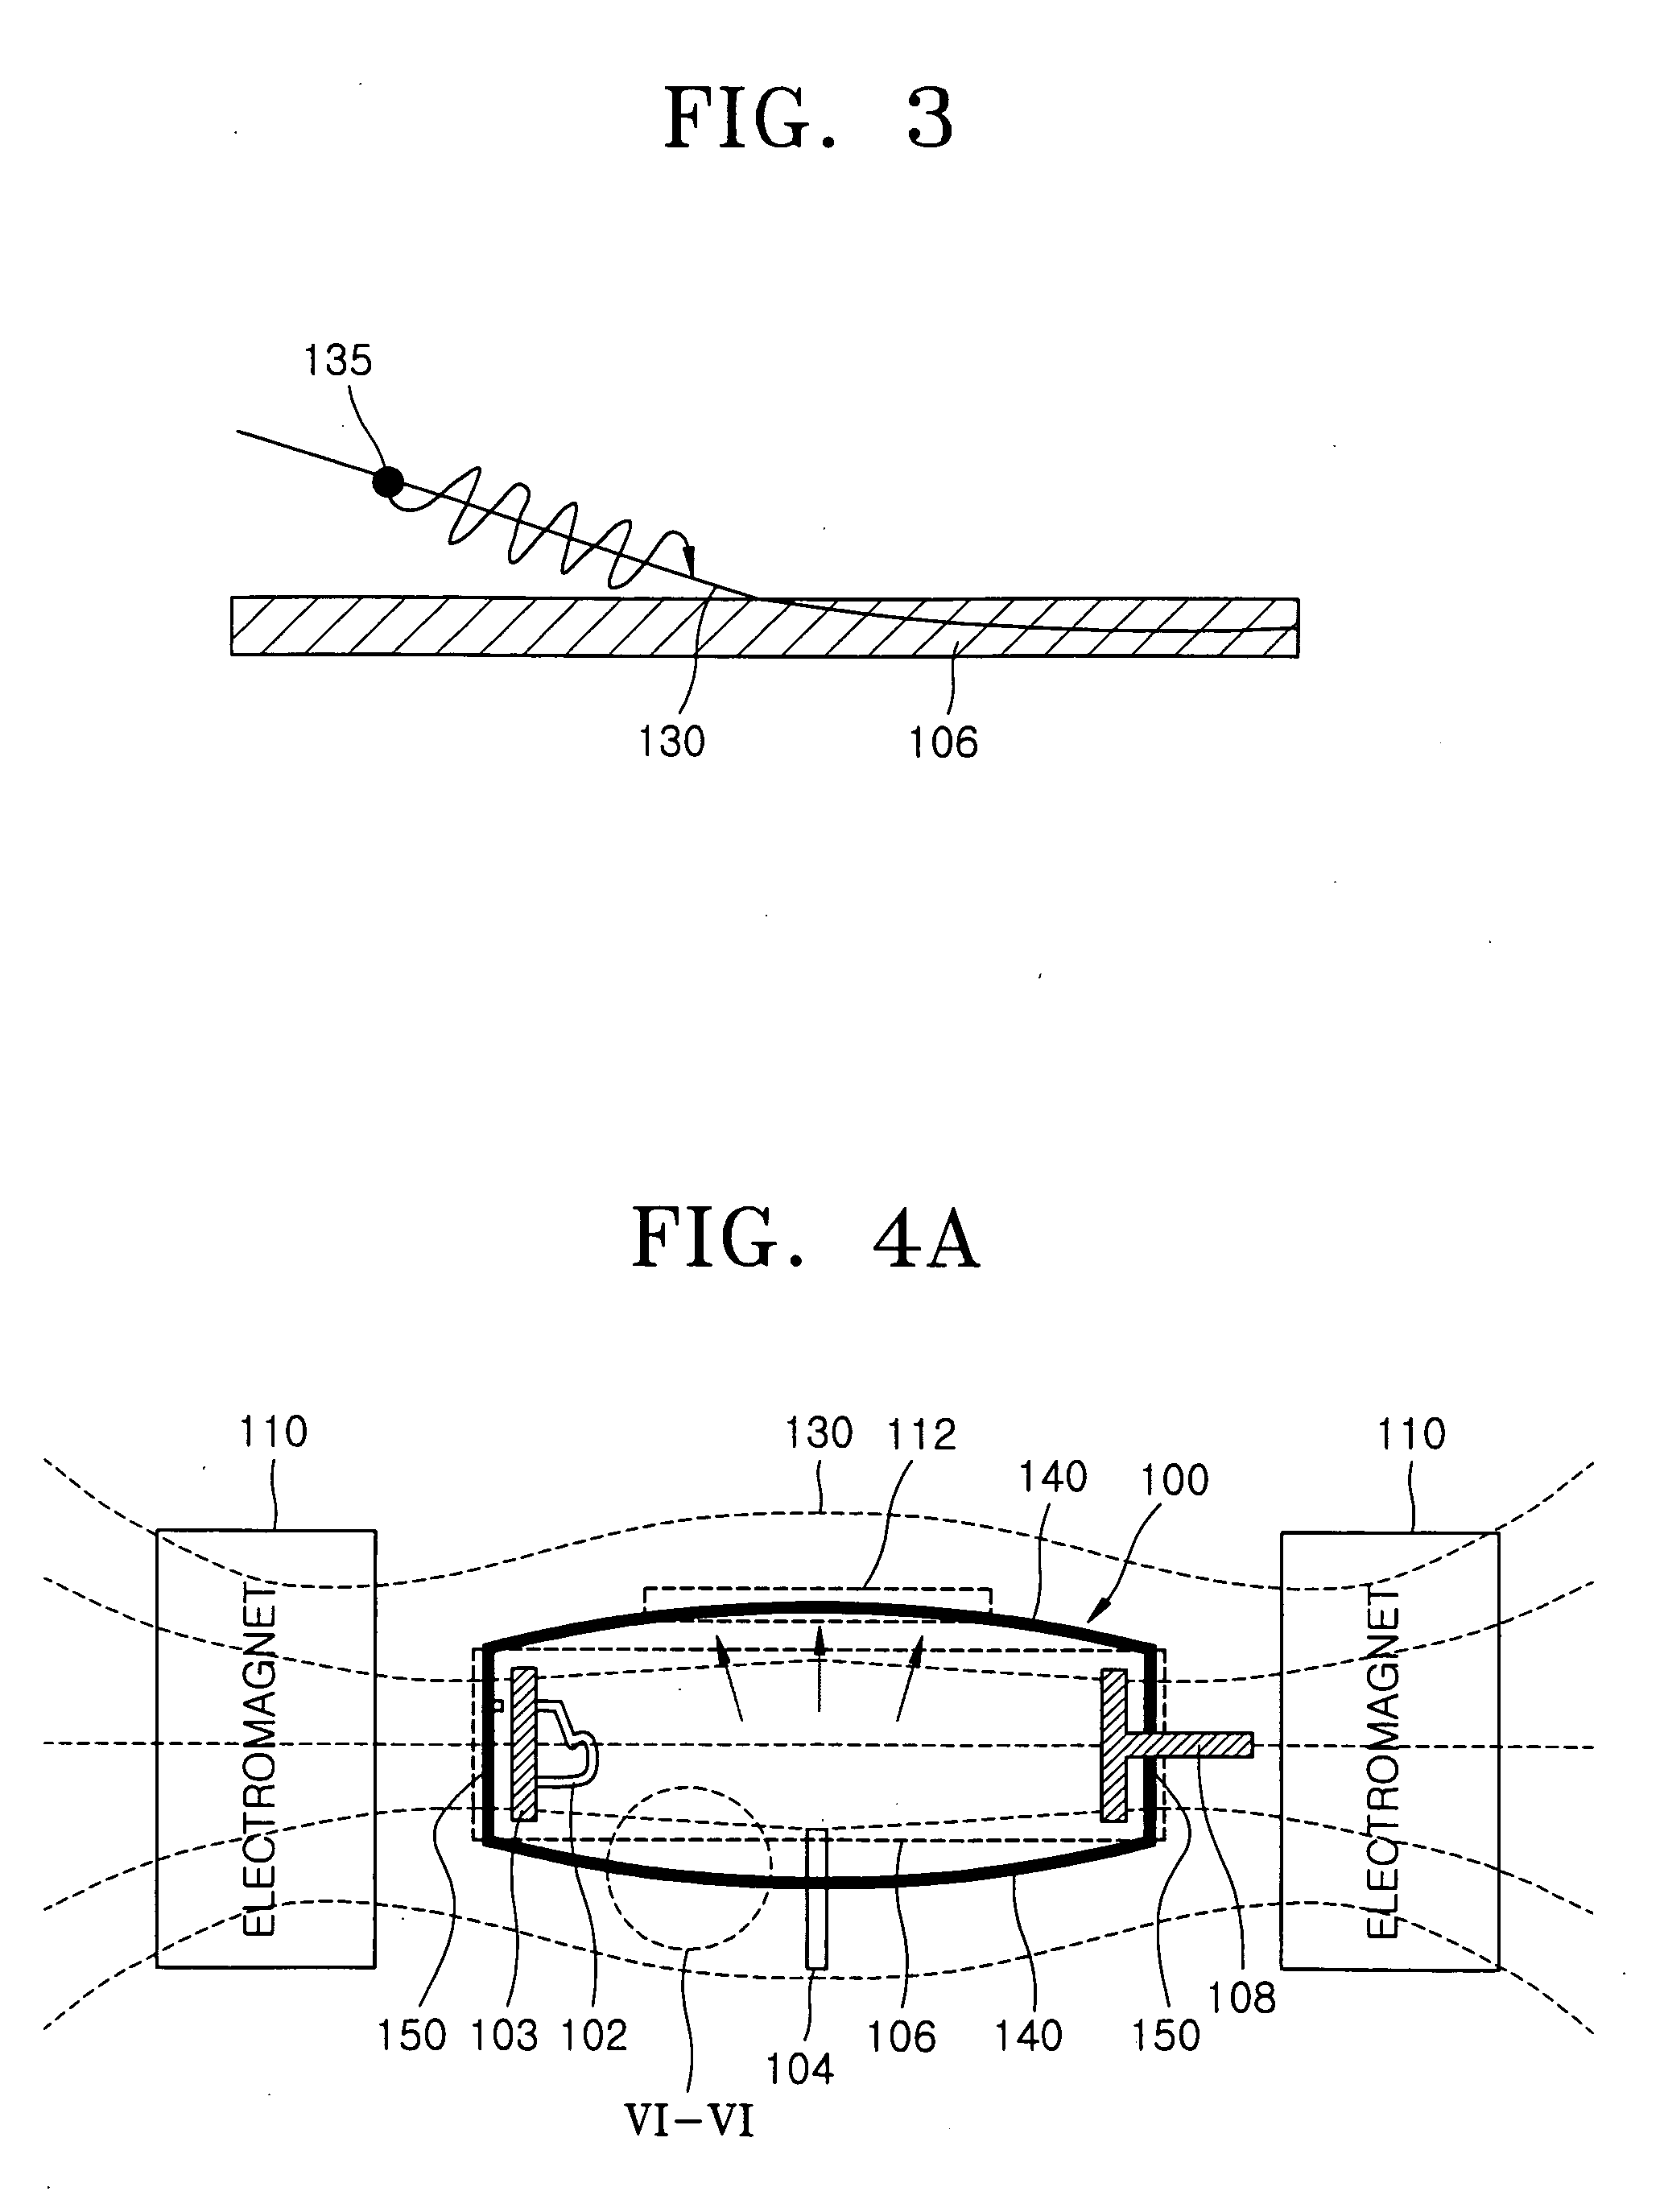 Ion implanters having an arc chamber that affects ion current density